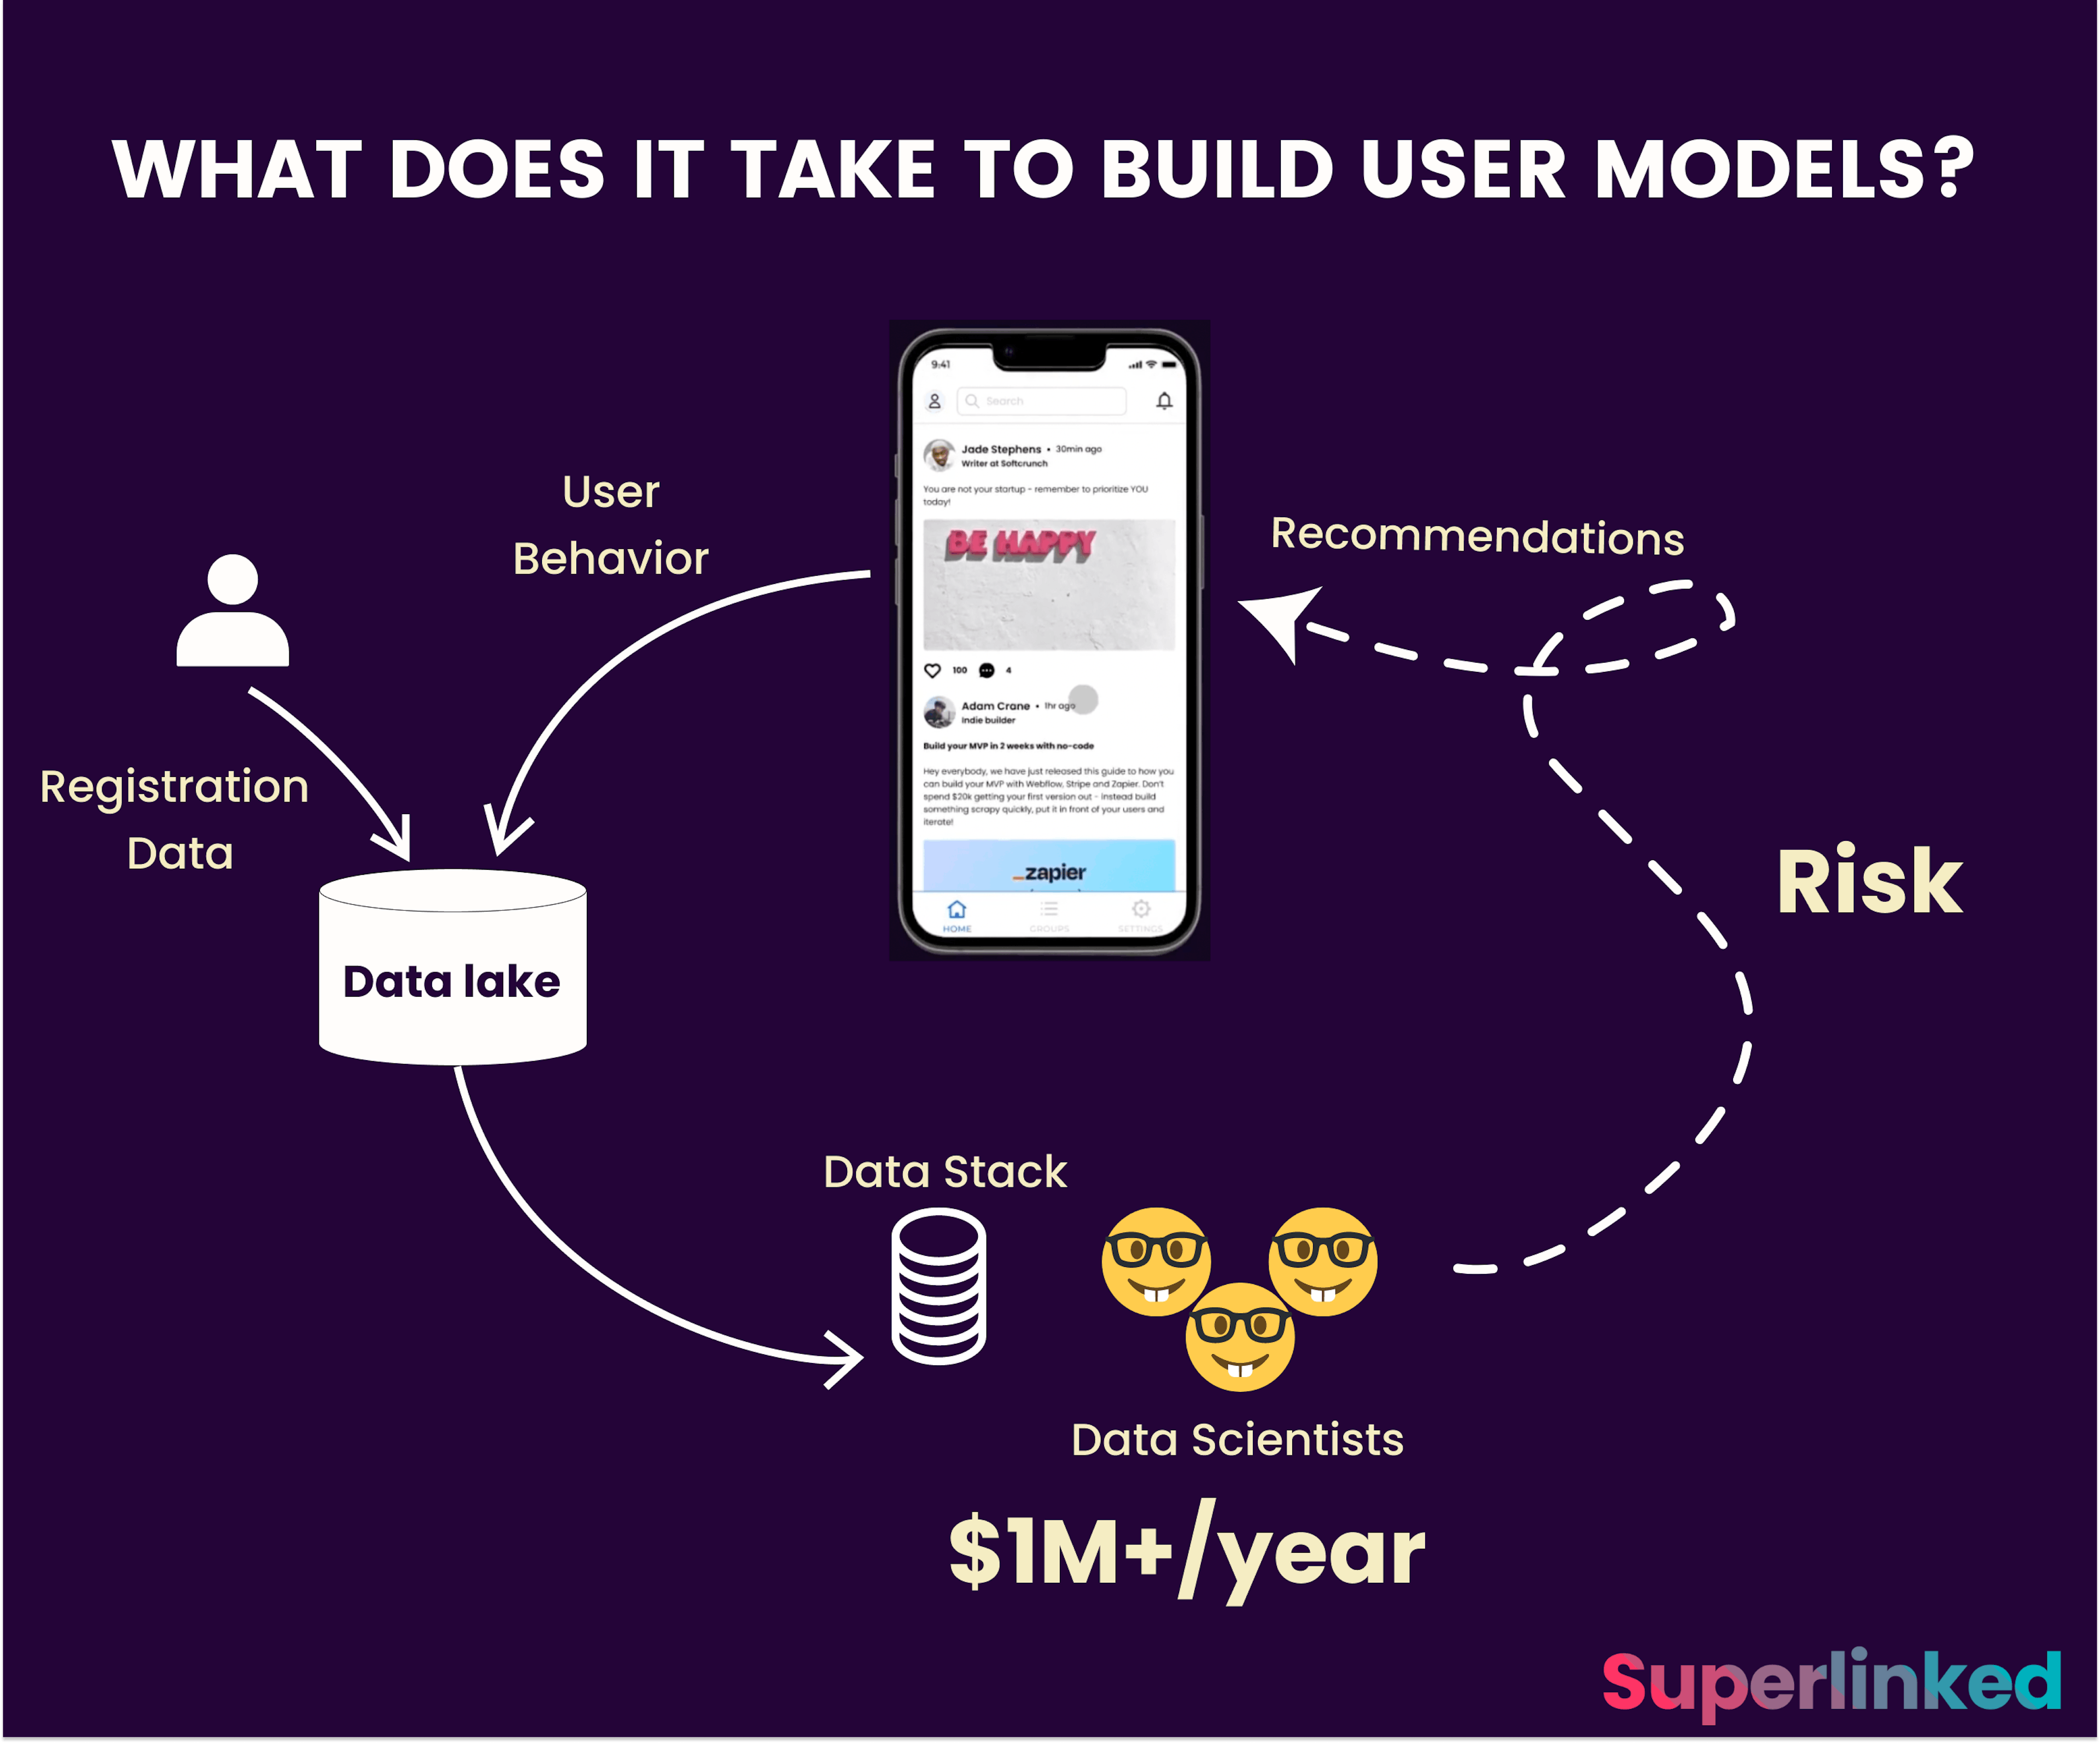 What does it take to build user models?